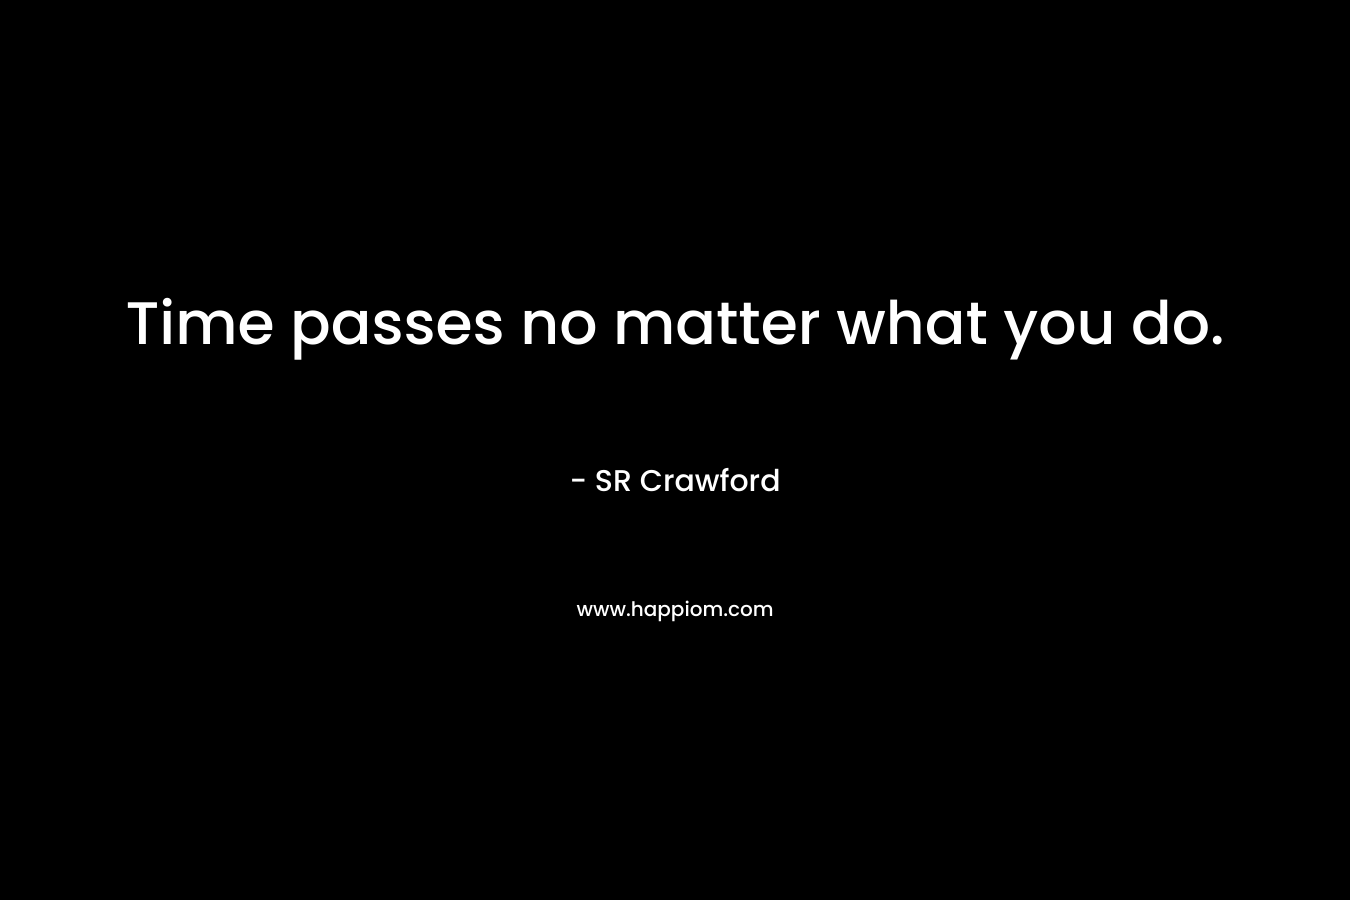 Time passes no matter what you do. – SR Crawford